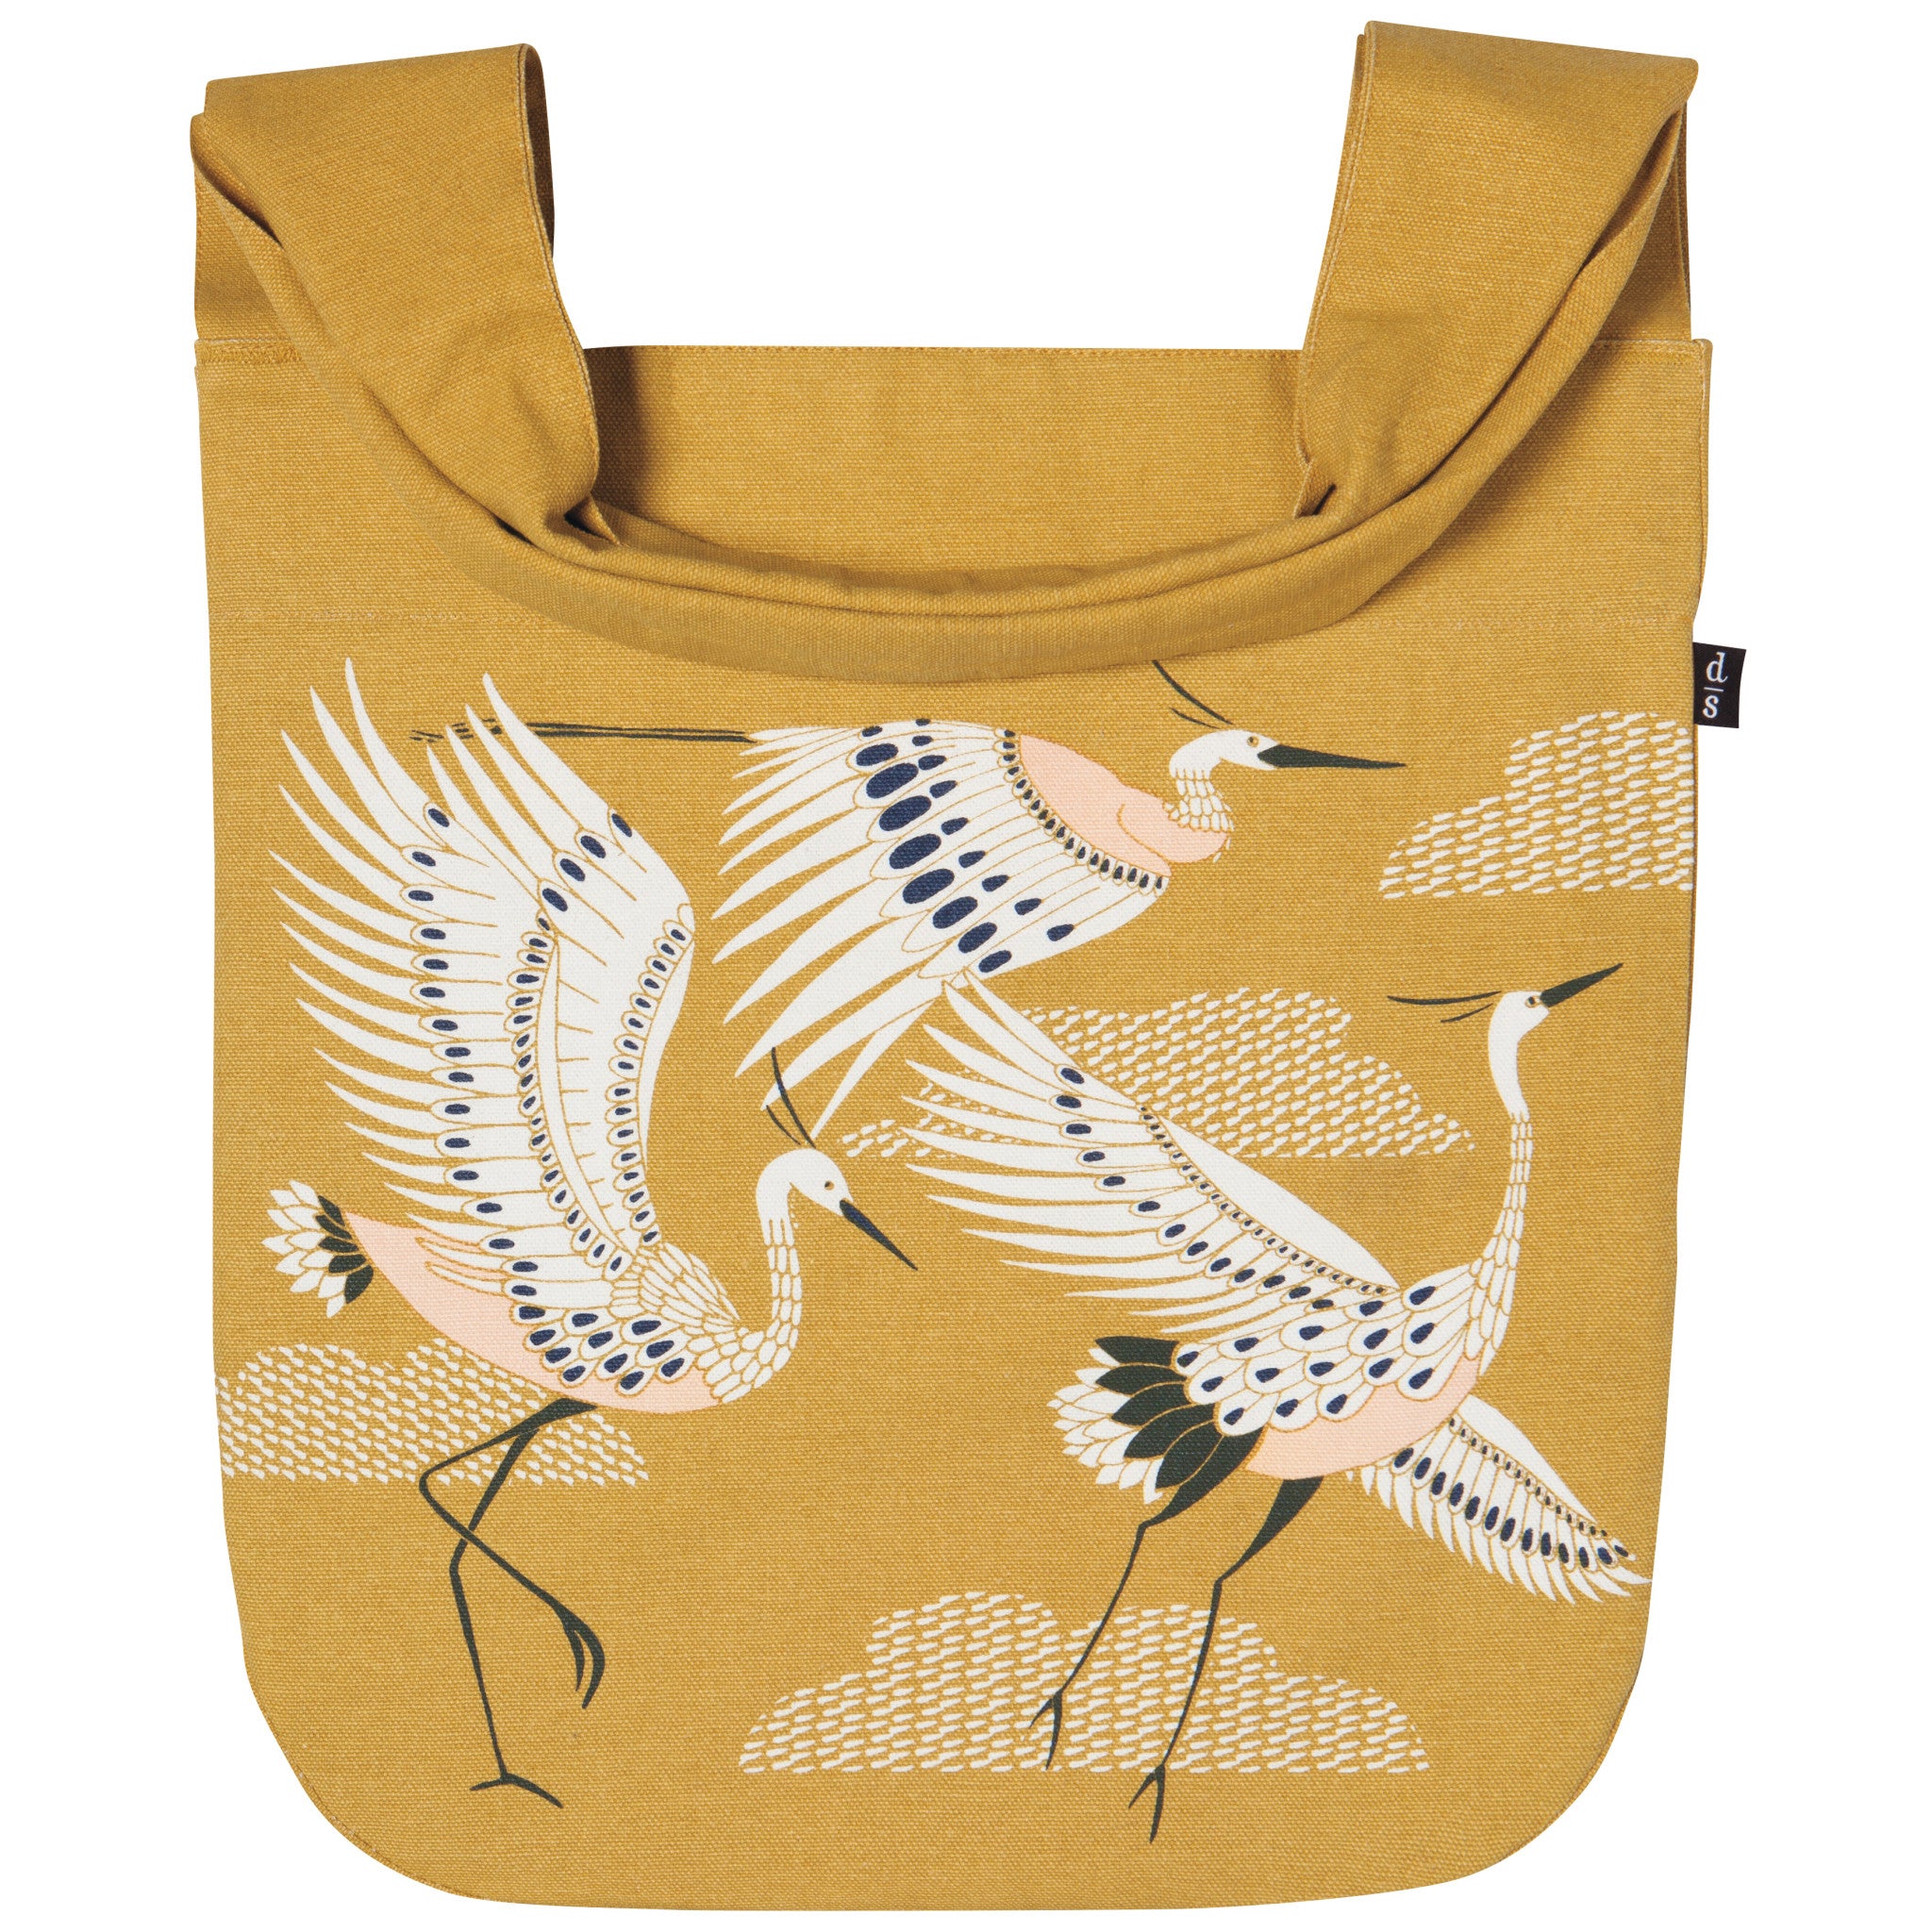 Flights of Fancy That's Bananas Francis Canvas Tote Bag